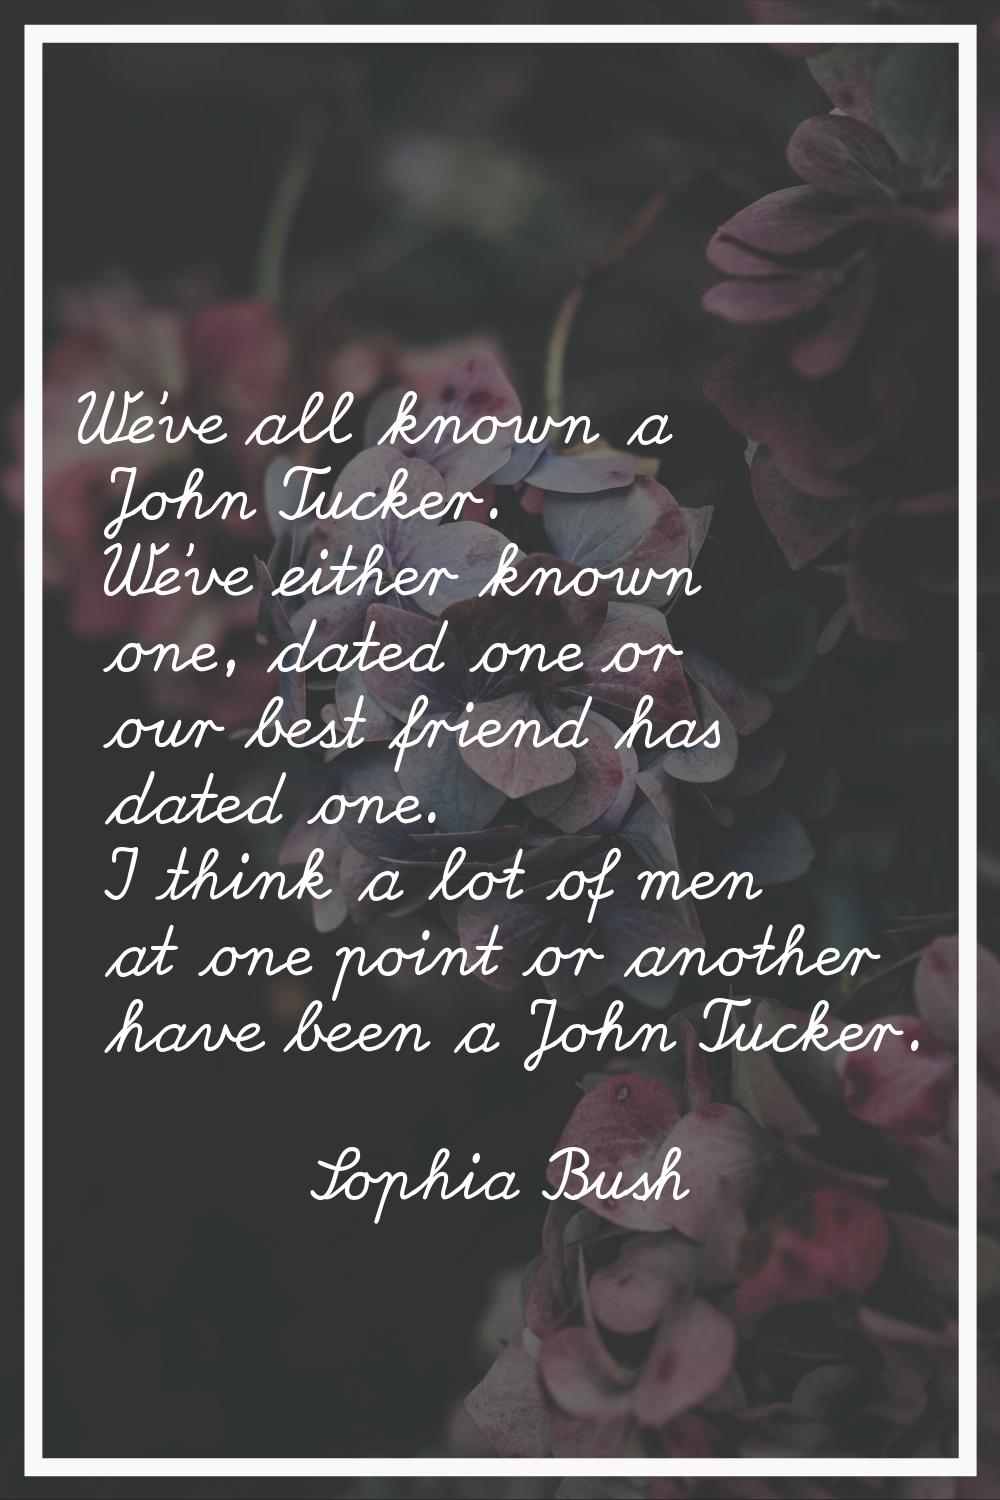 We've all known a John Tucker. We've either known one, dated one or our best friend has dated one. 